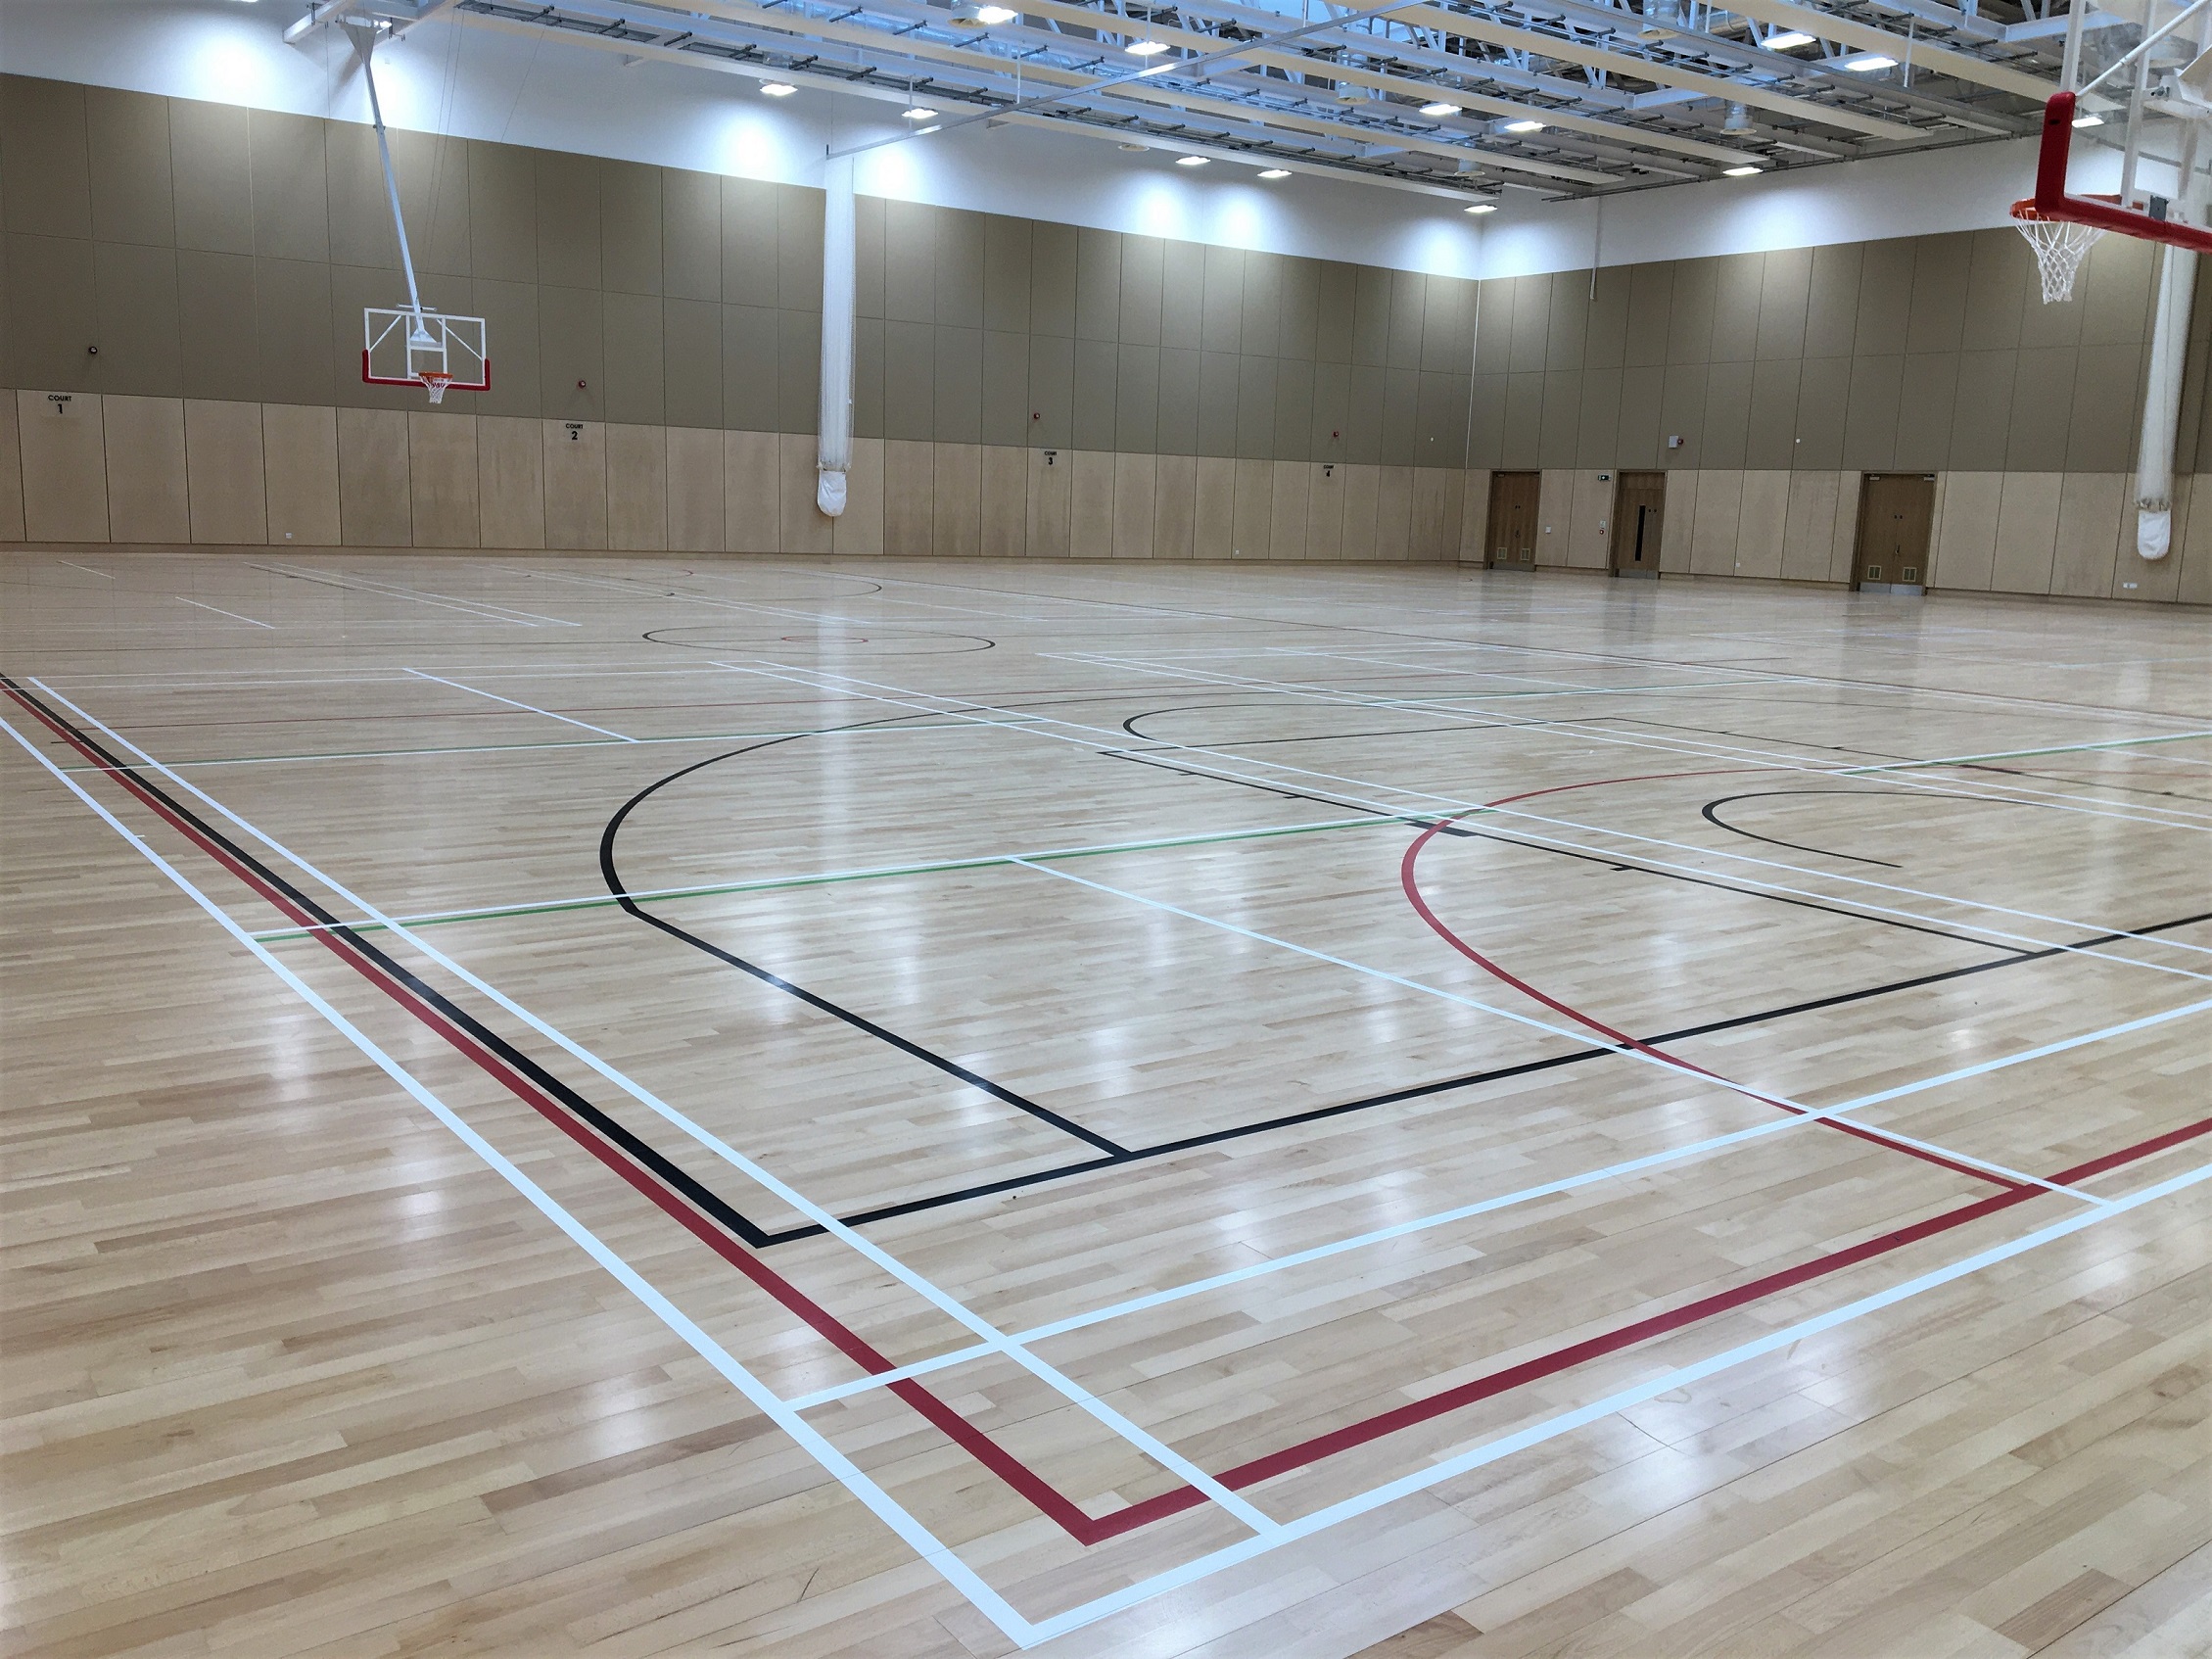 Works near completion on first phase of the new Allander Leisure Centre